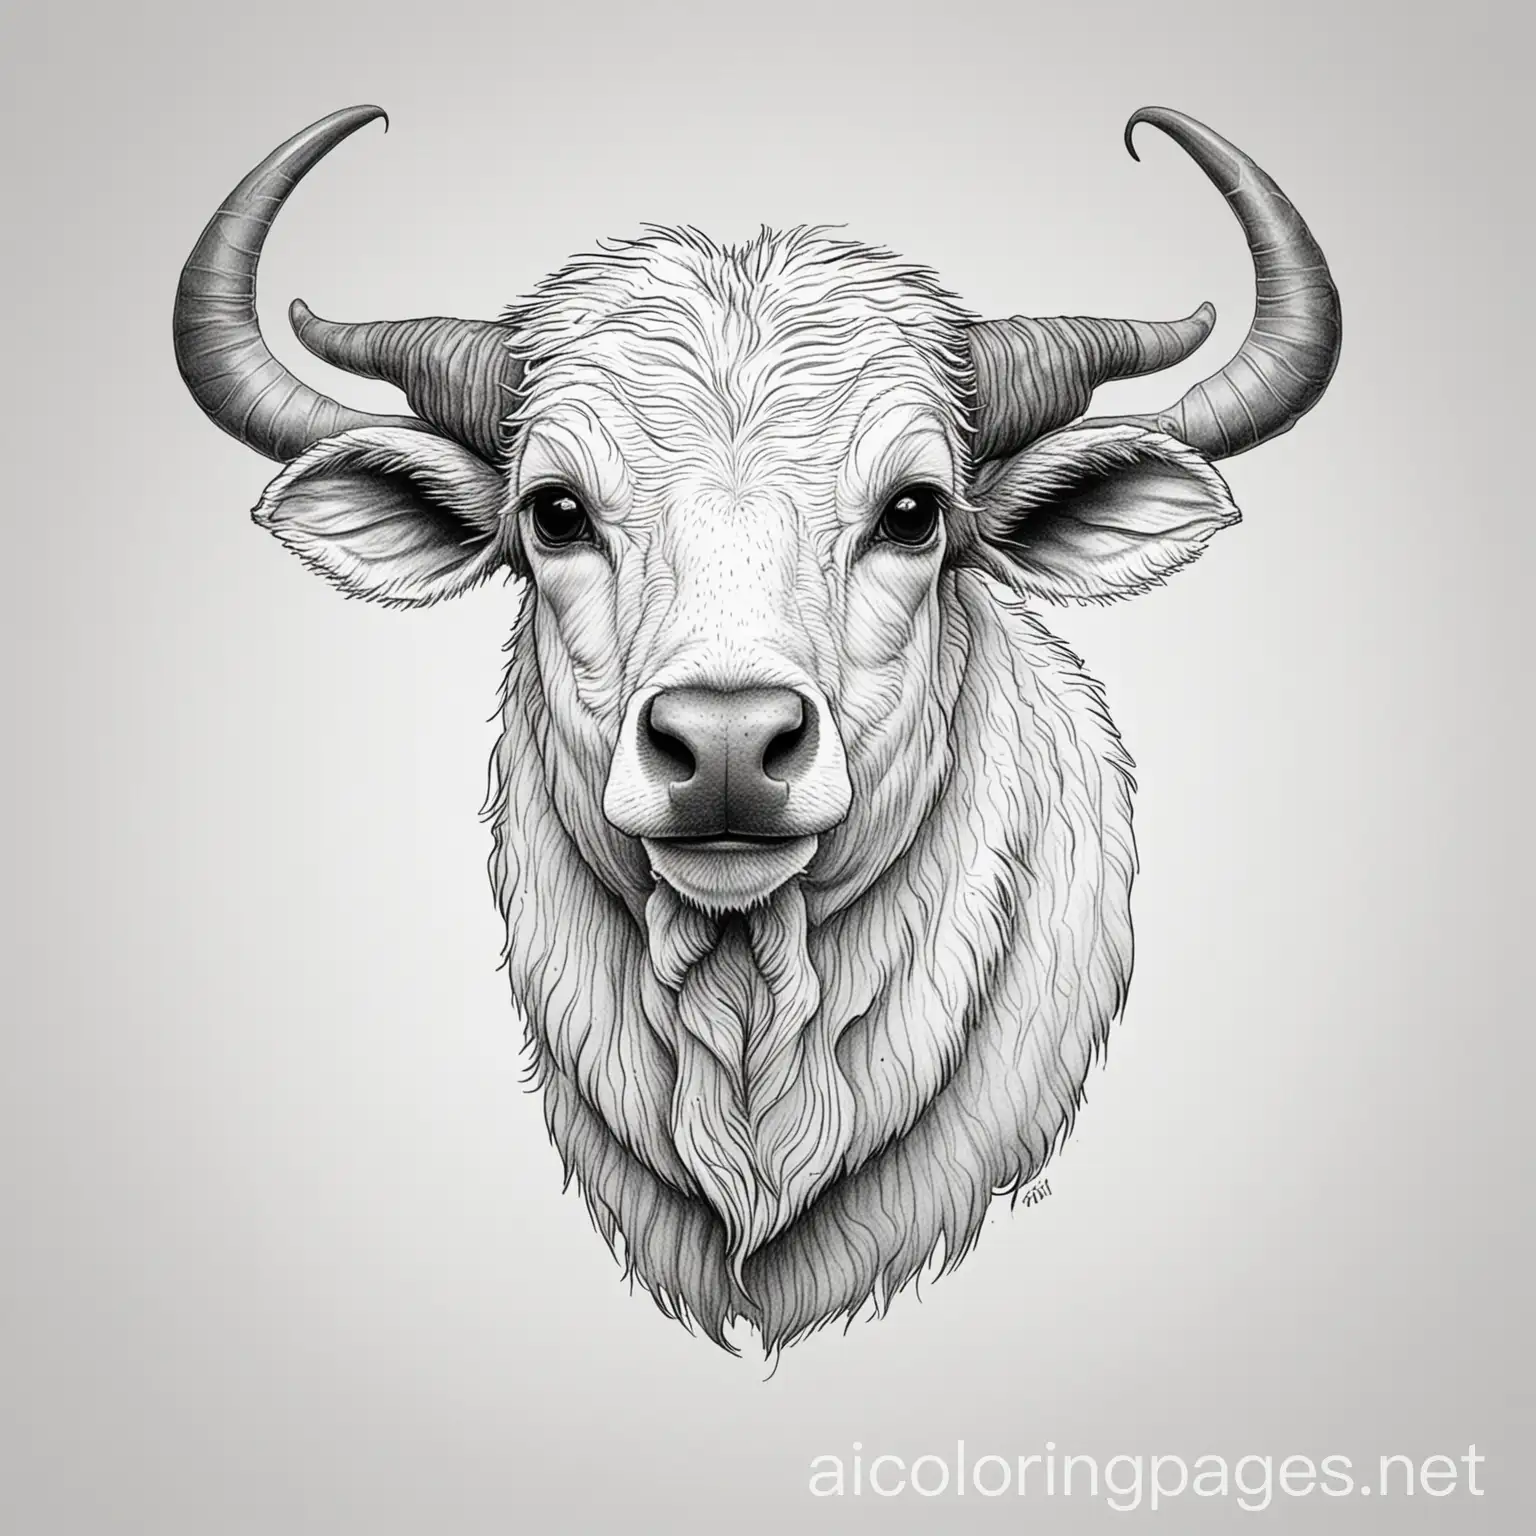 Philippine-Tamaraw-Coloring-Page-Simplistic-Line-Art-on-White-Background